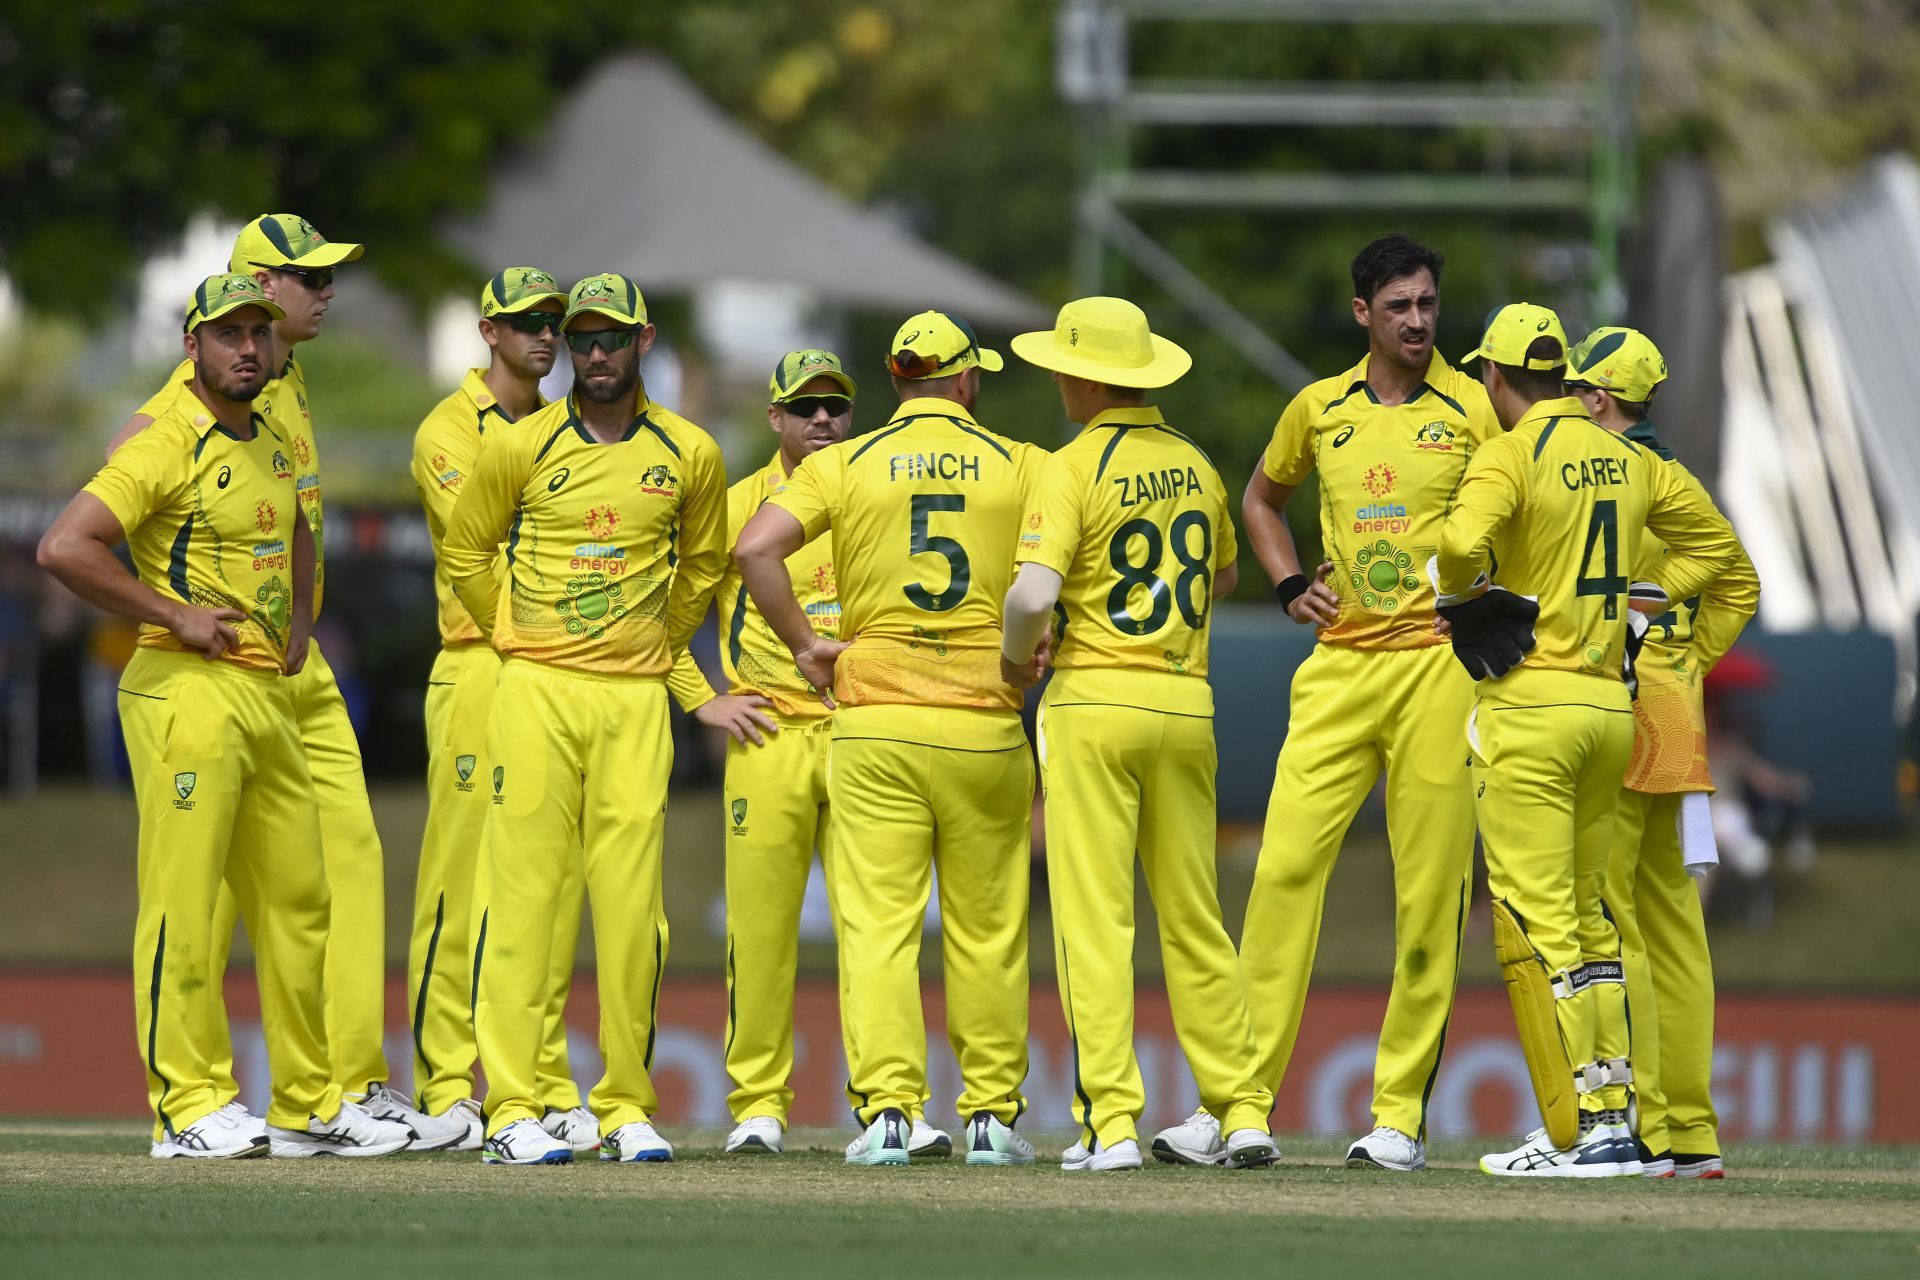 Australia are the favorites to win the 3rd ODI of the series against Zimbabwe (Image: Getty)